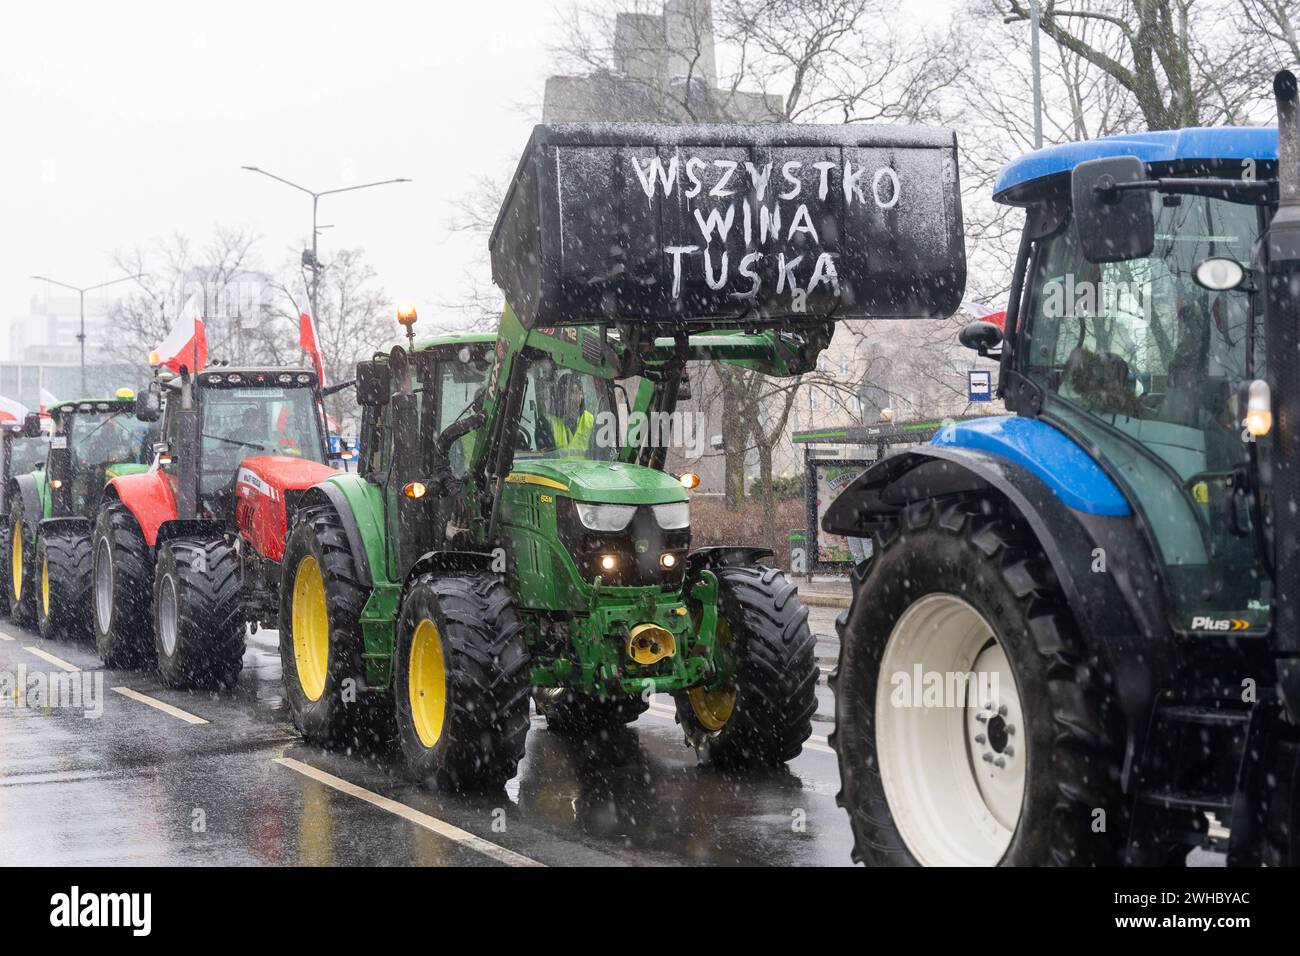 Tractors of Polish farmers slow down traffic in the town Poznan. Around 3k tractors took part in the protest against the inflow of agricultural products into the European Union from Ukraine Farmers protest in Poznan, Poland, February 9, 2024 Copyright: xMarekxAntonixIwanczukx MAI05885 Stock Photo